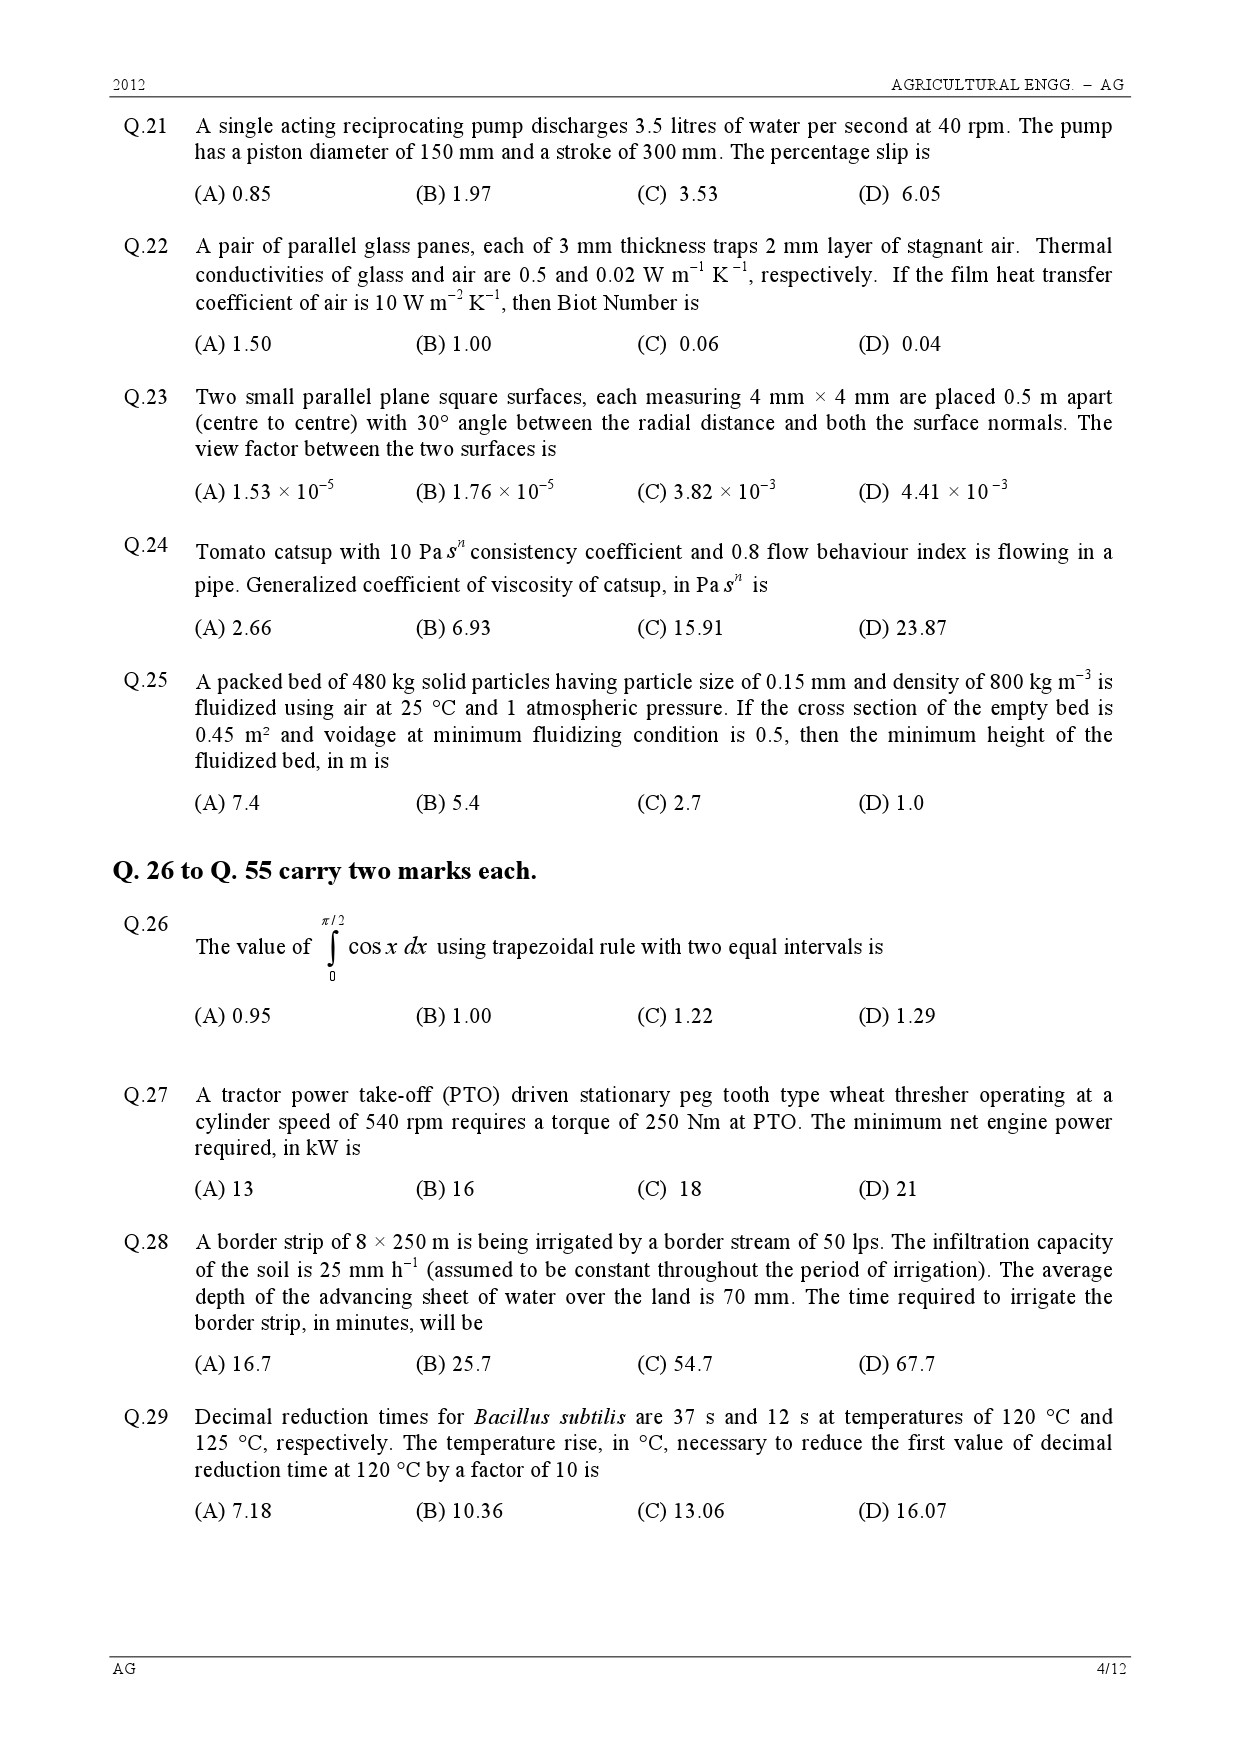 GATE Exam Question Paper 2012 Agricultural Engineering 4